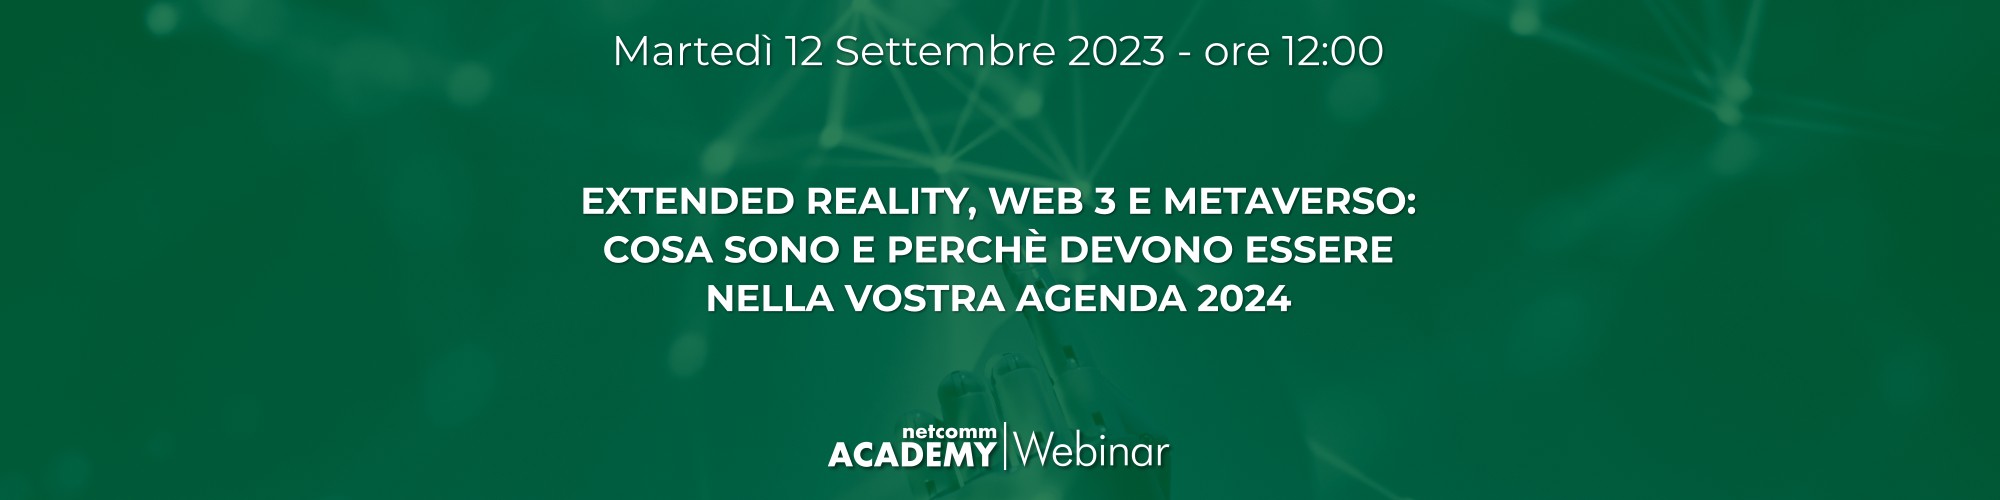 extended reality web3 metaverso